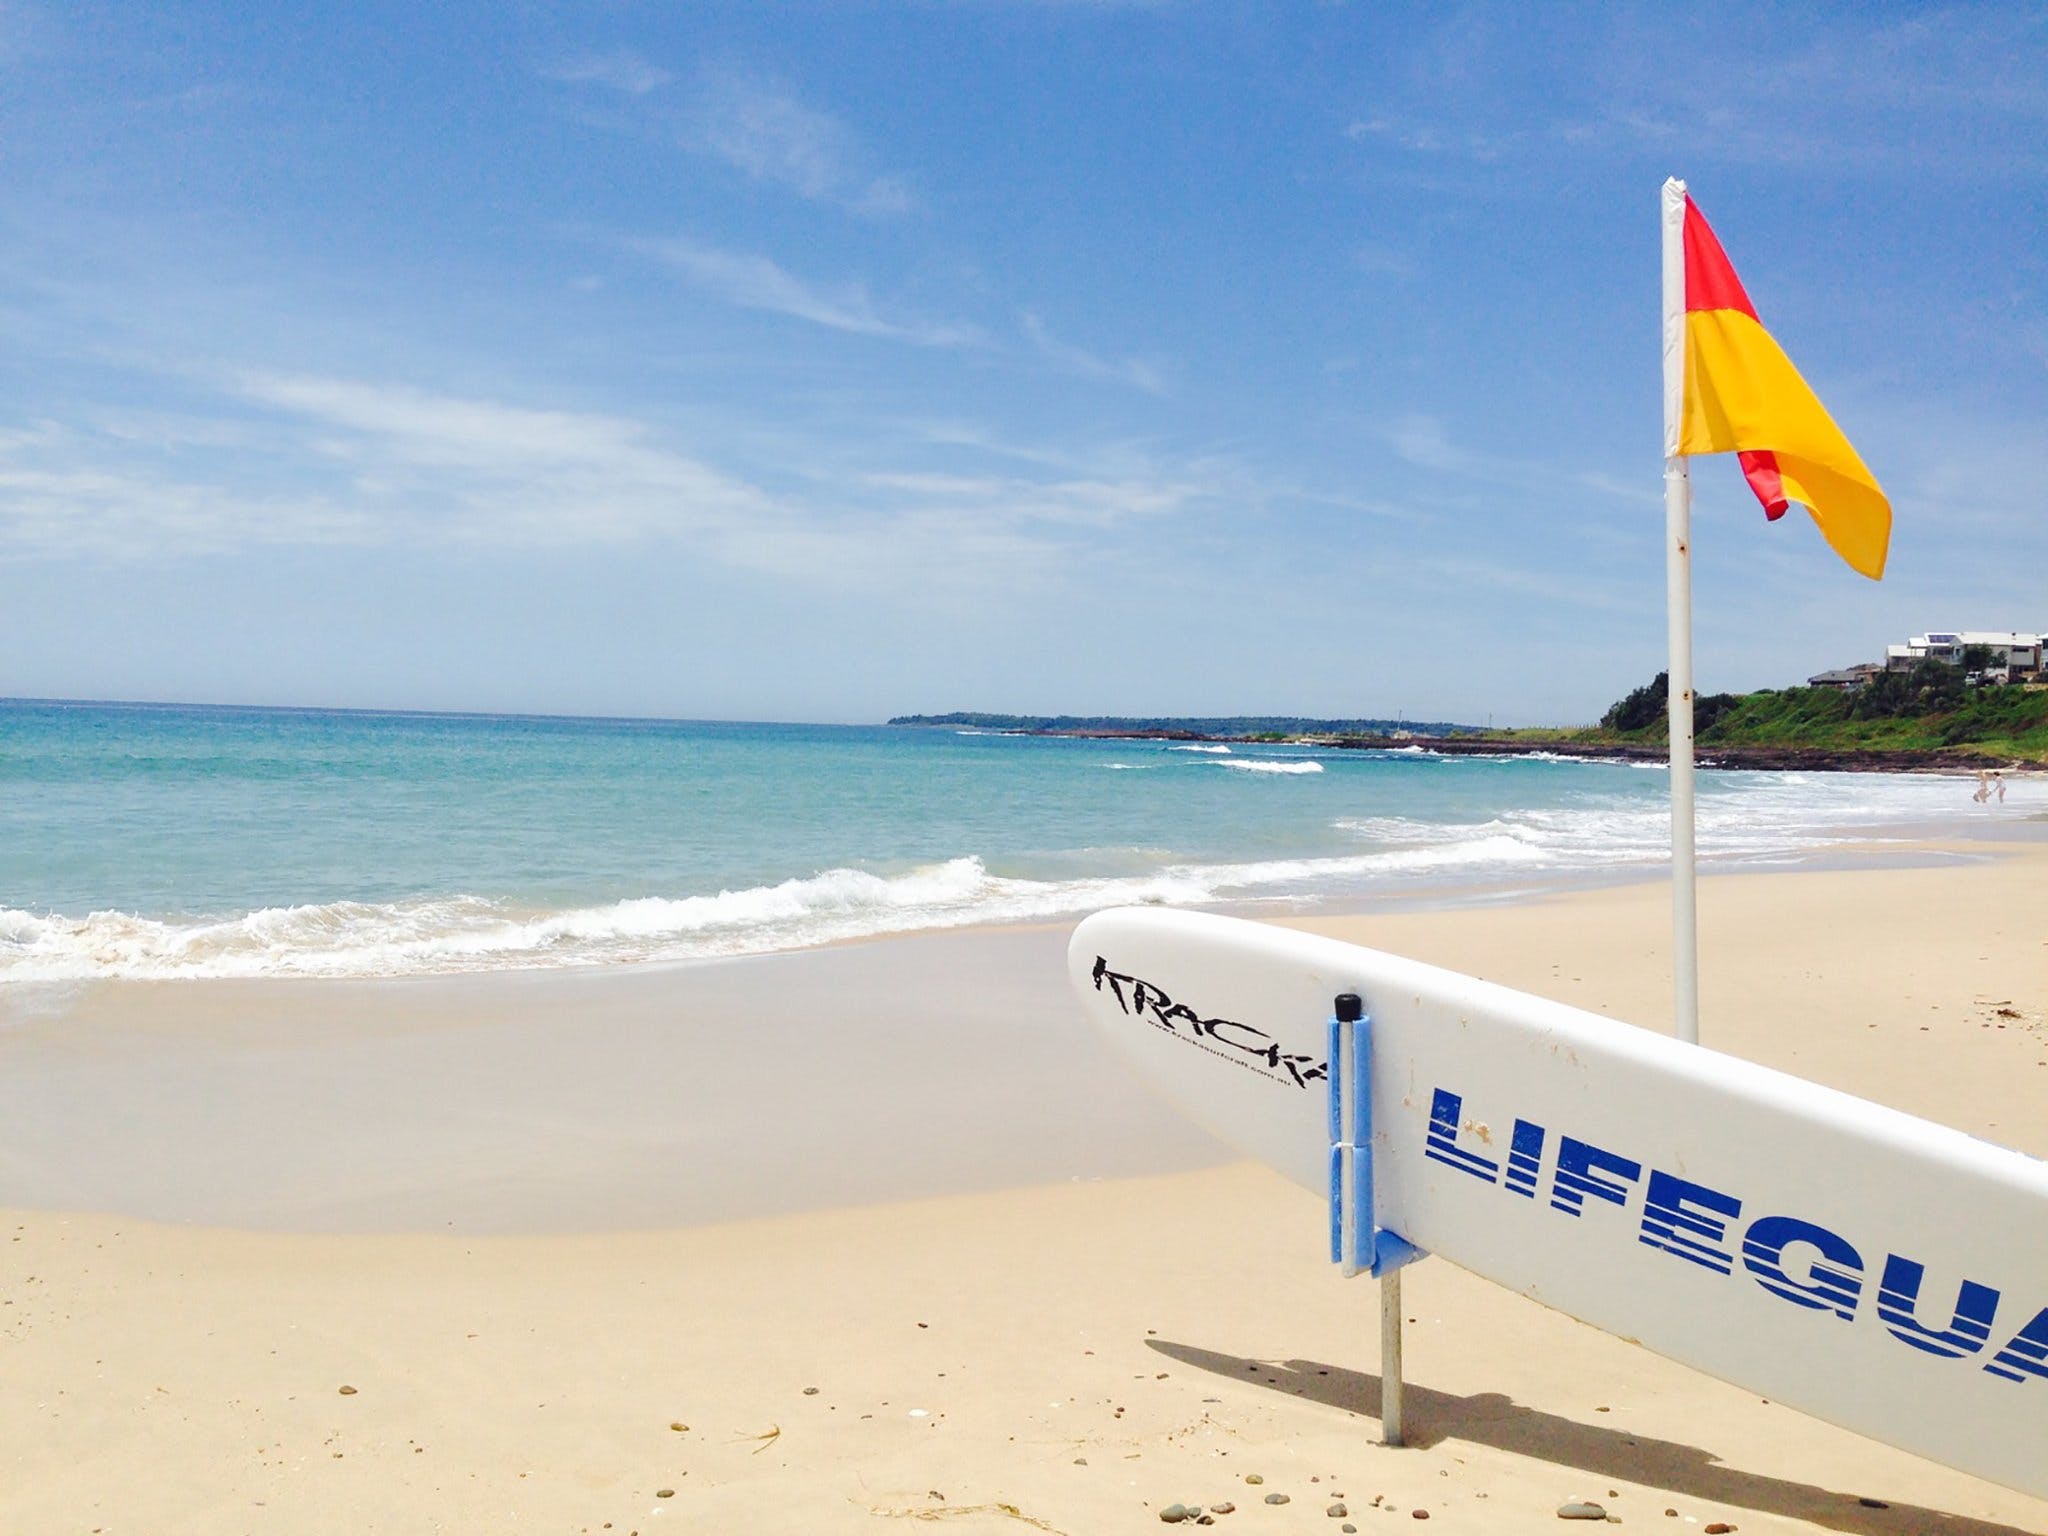 Shellharbour North Beach - Find Attractions